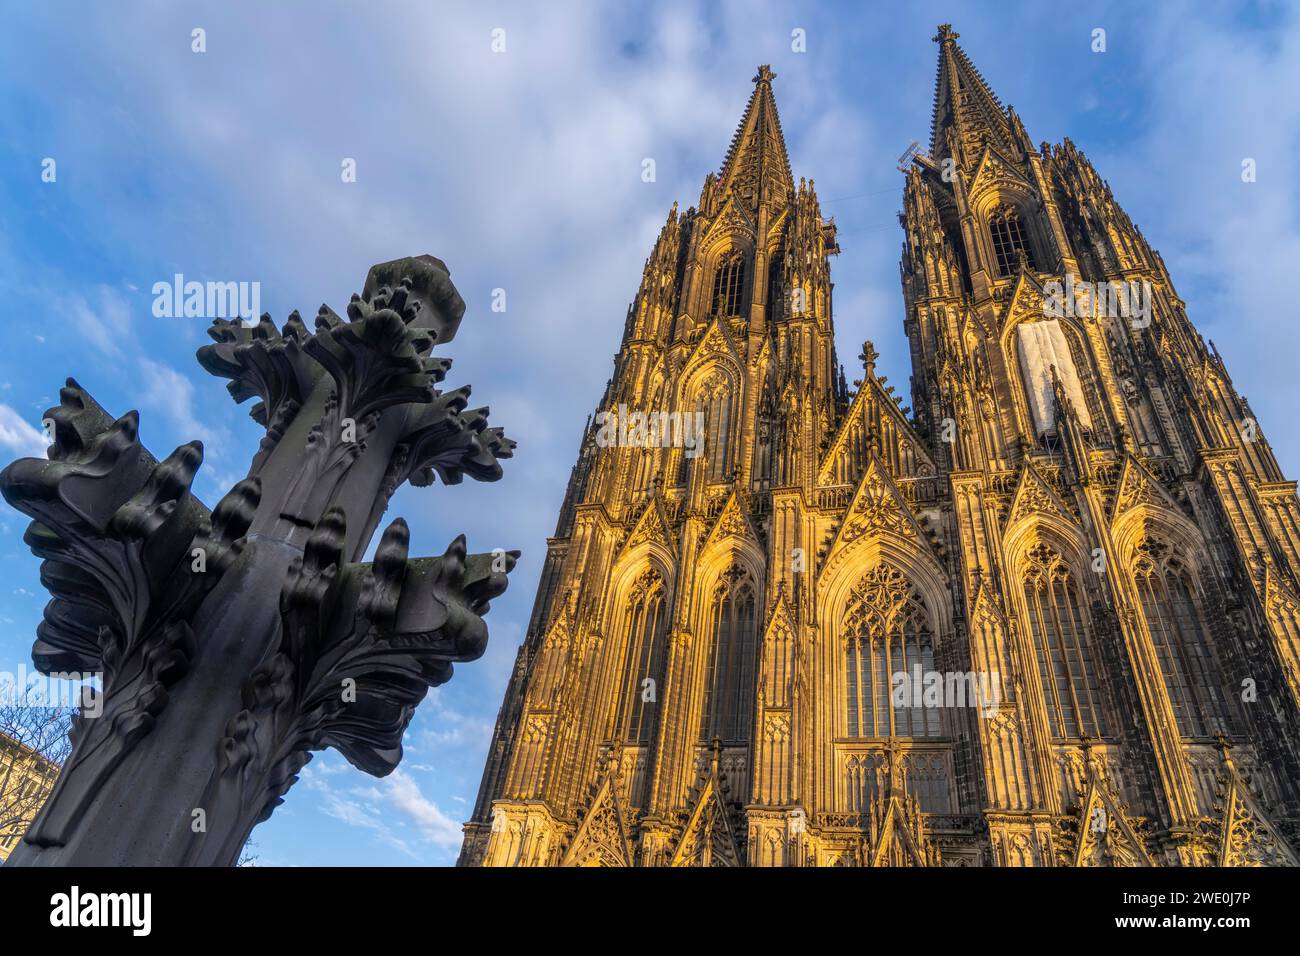 Cologne Cathedral, view of the west façade, on the north tower one of the rare occasions almost without scaffolding on the towers, Cologne, Germany, Stock Photo